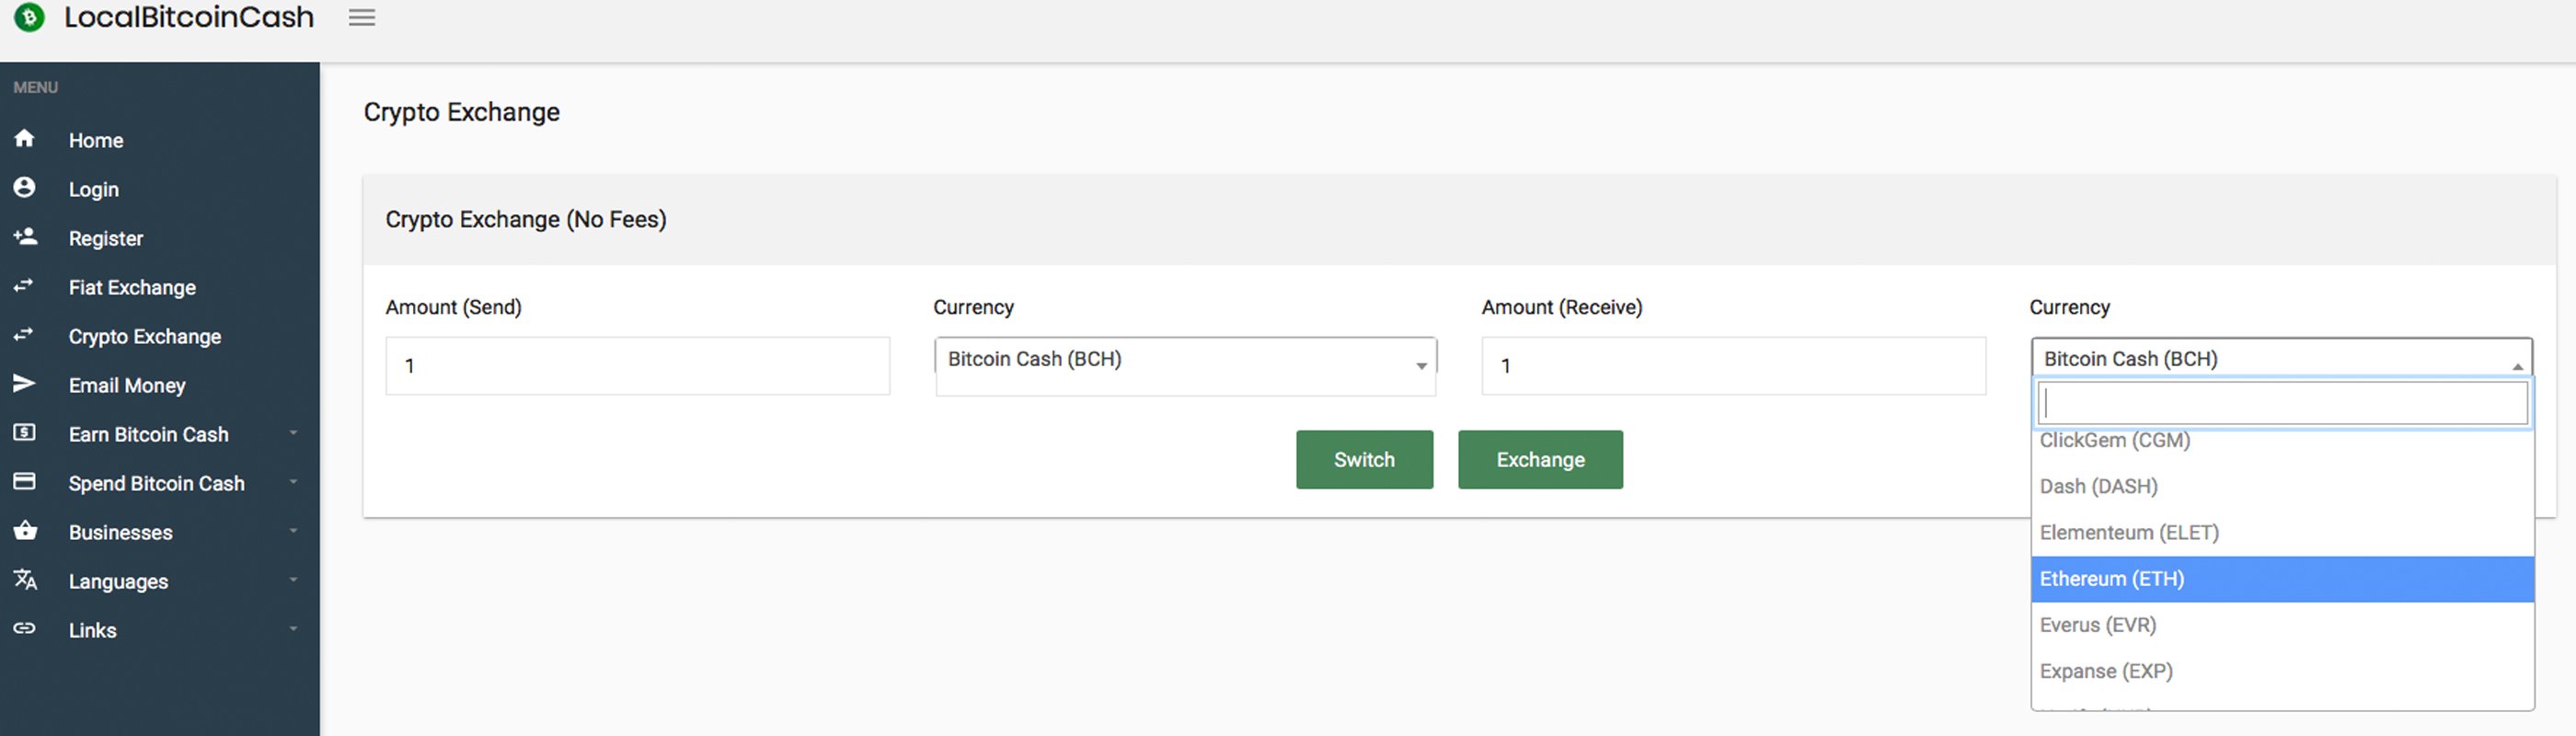 Localbitcoincash.org Revamps Website and Adds New P2P Features 